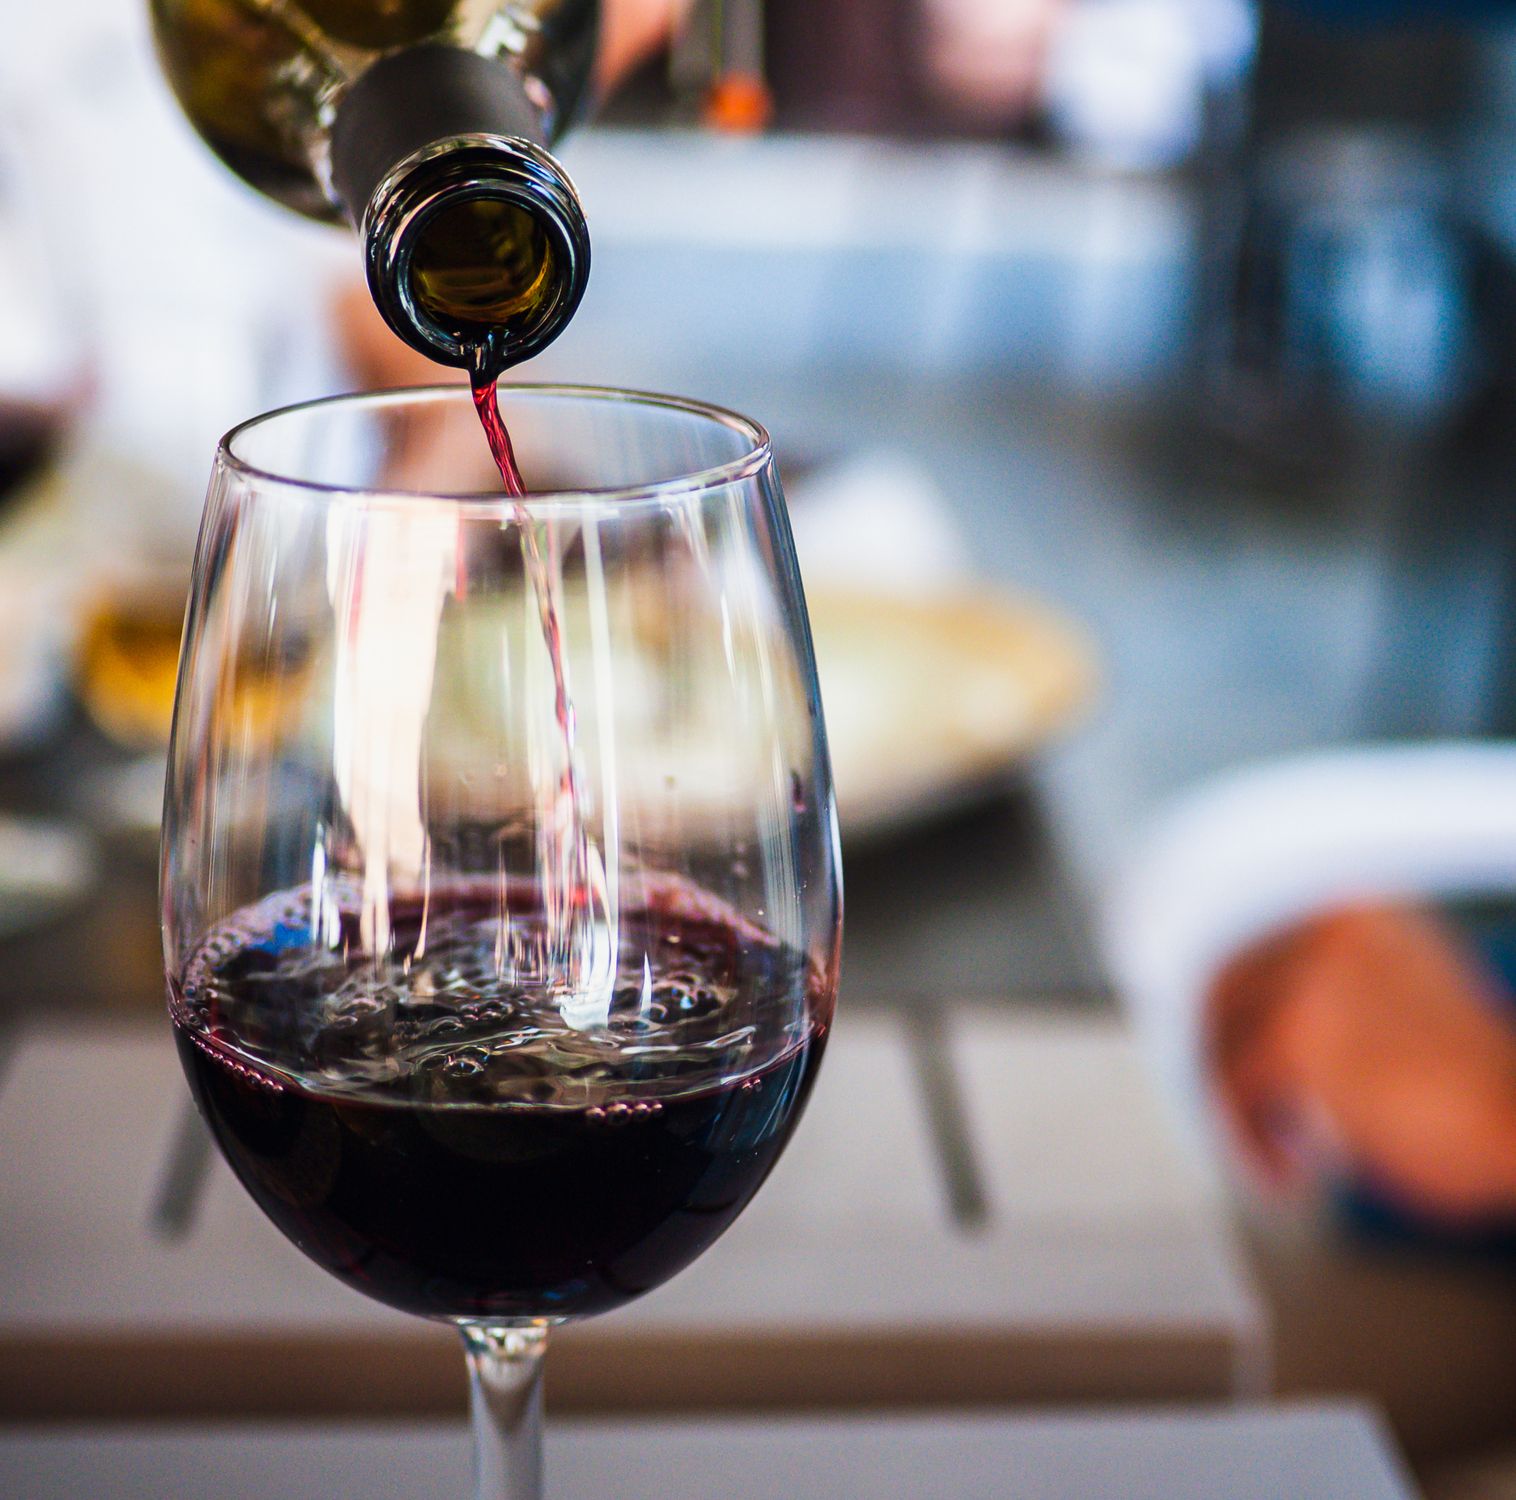 According to a New Report, No Amount of Alcohol Is Good for Your Heart